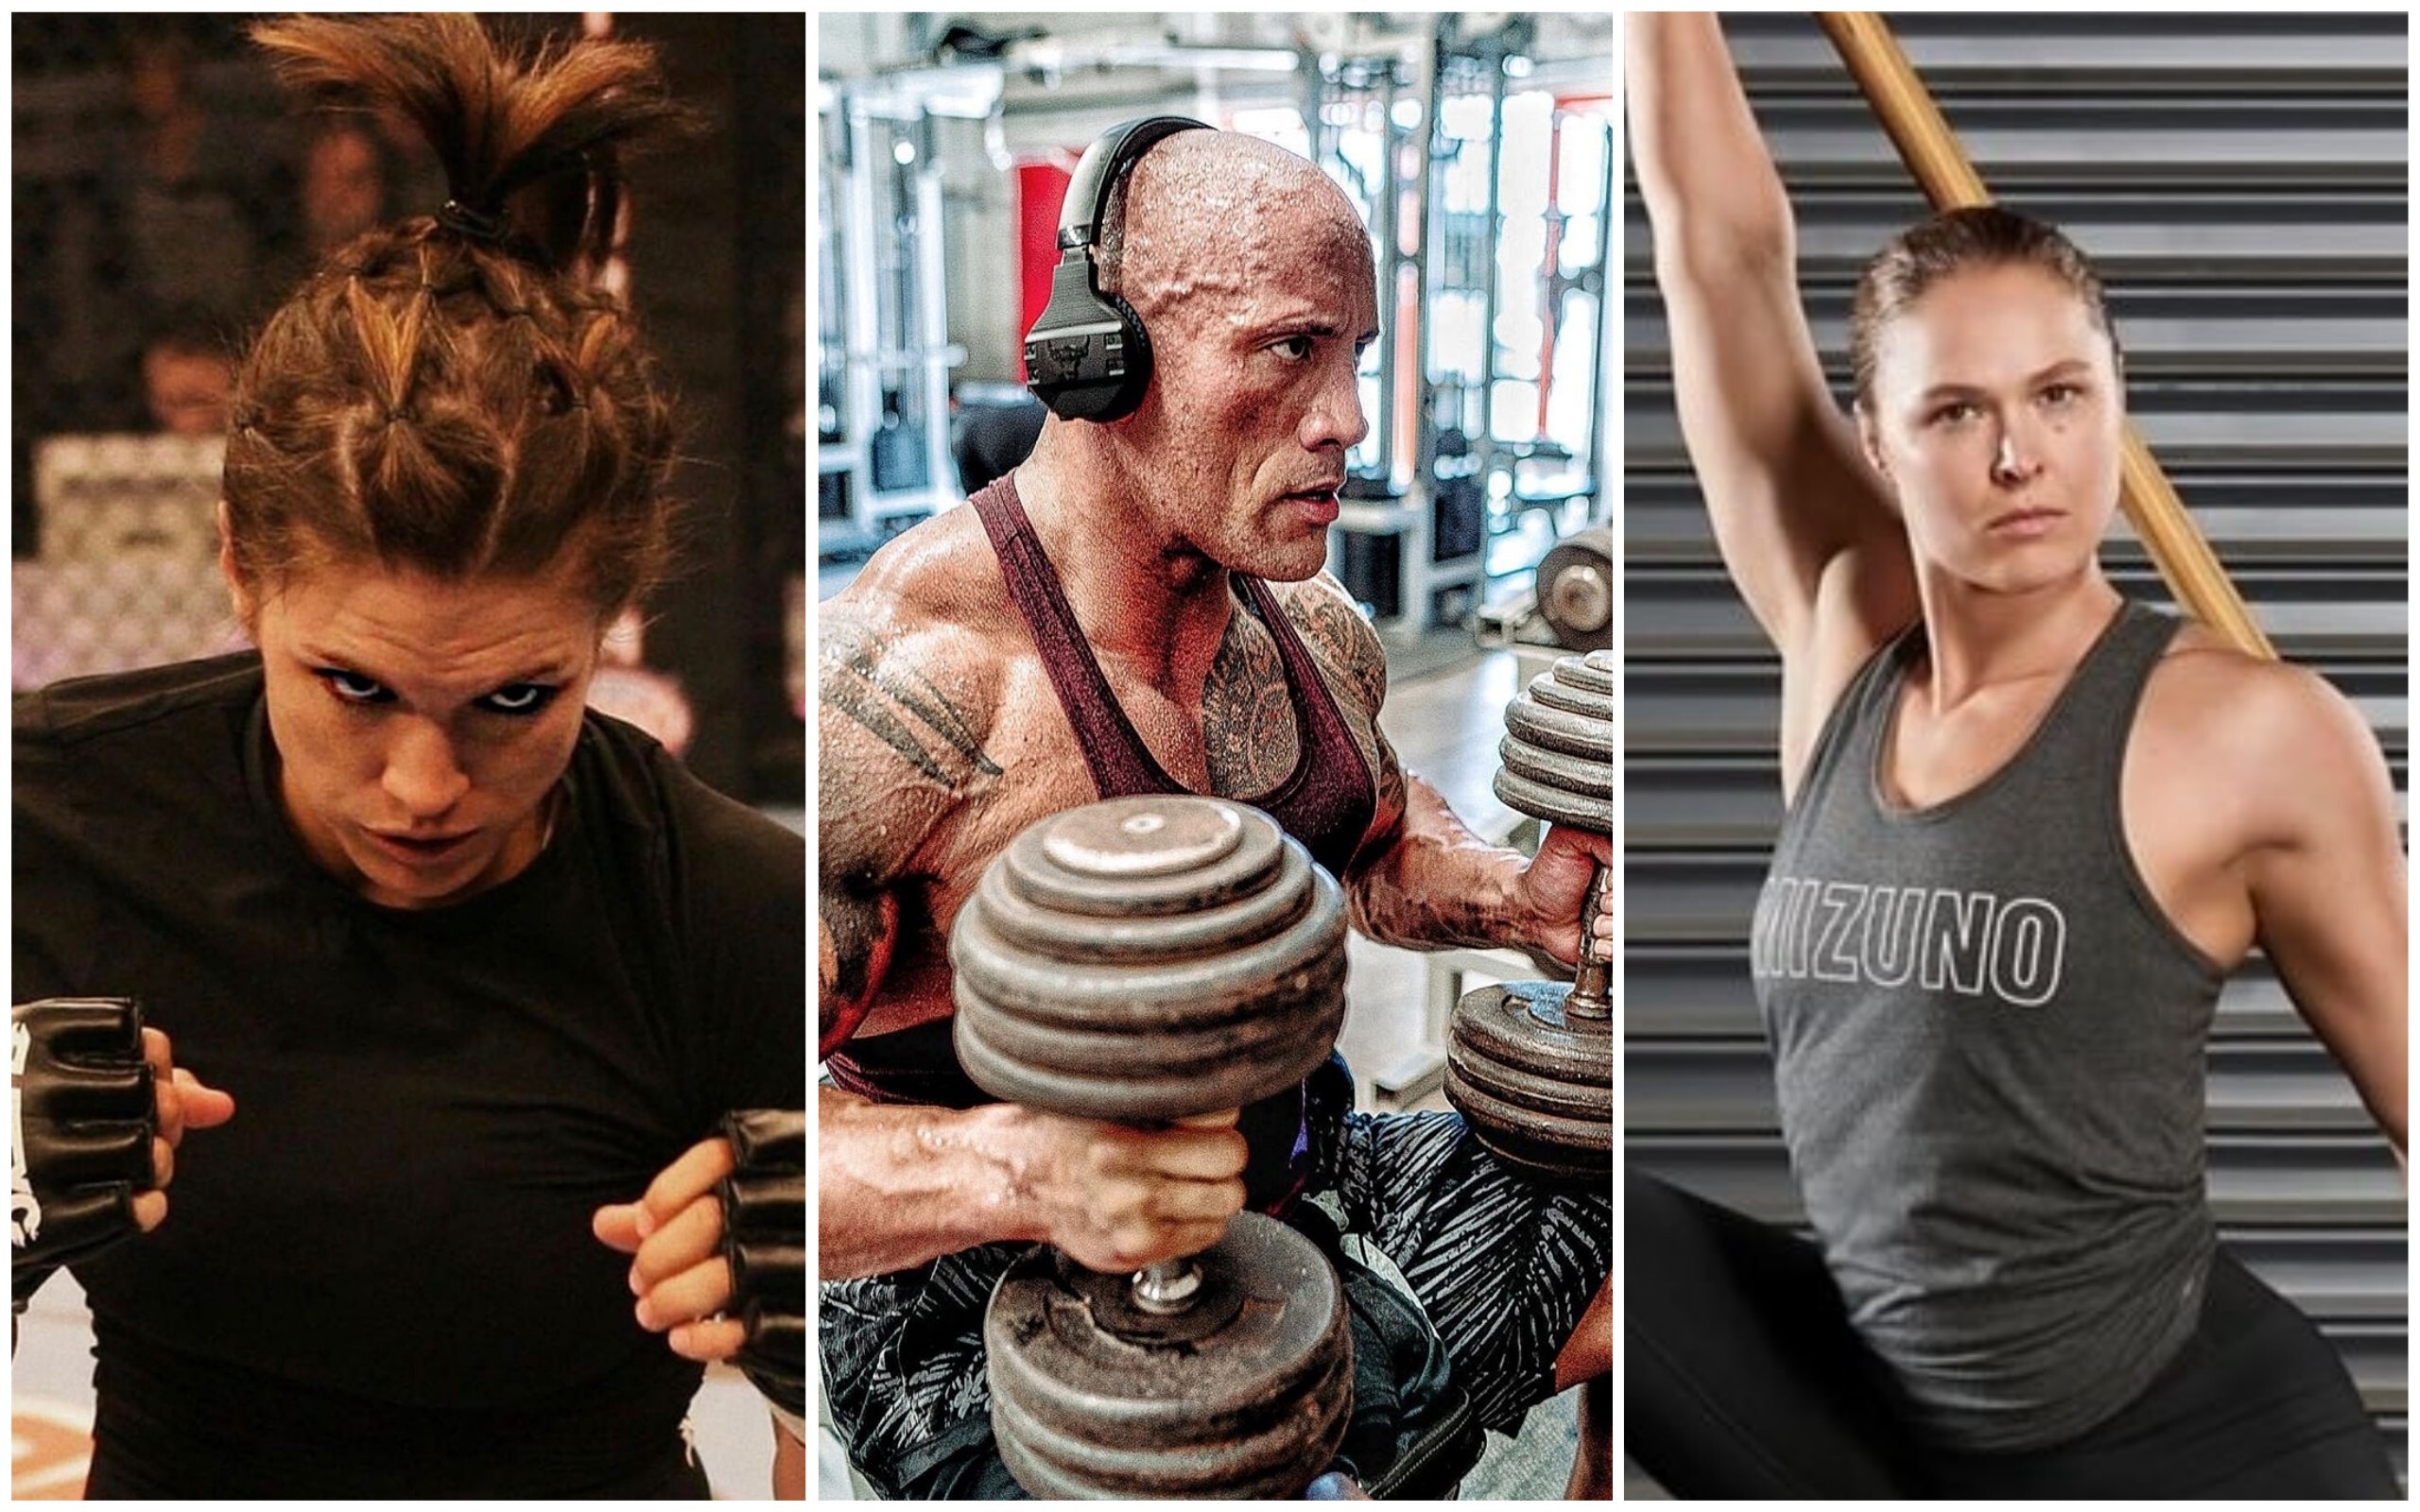 Gina Carano, Dwayne Johnson and Ronda Rousey were successful fighters before making the leap to the big screen. Photos: Instagram